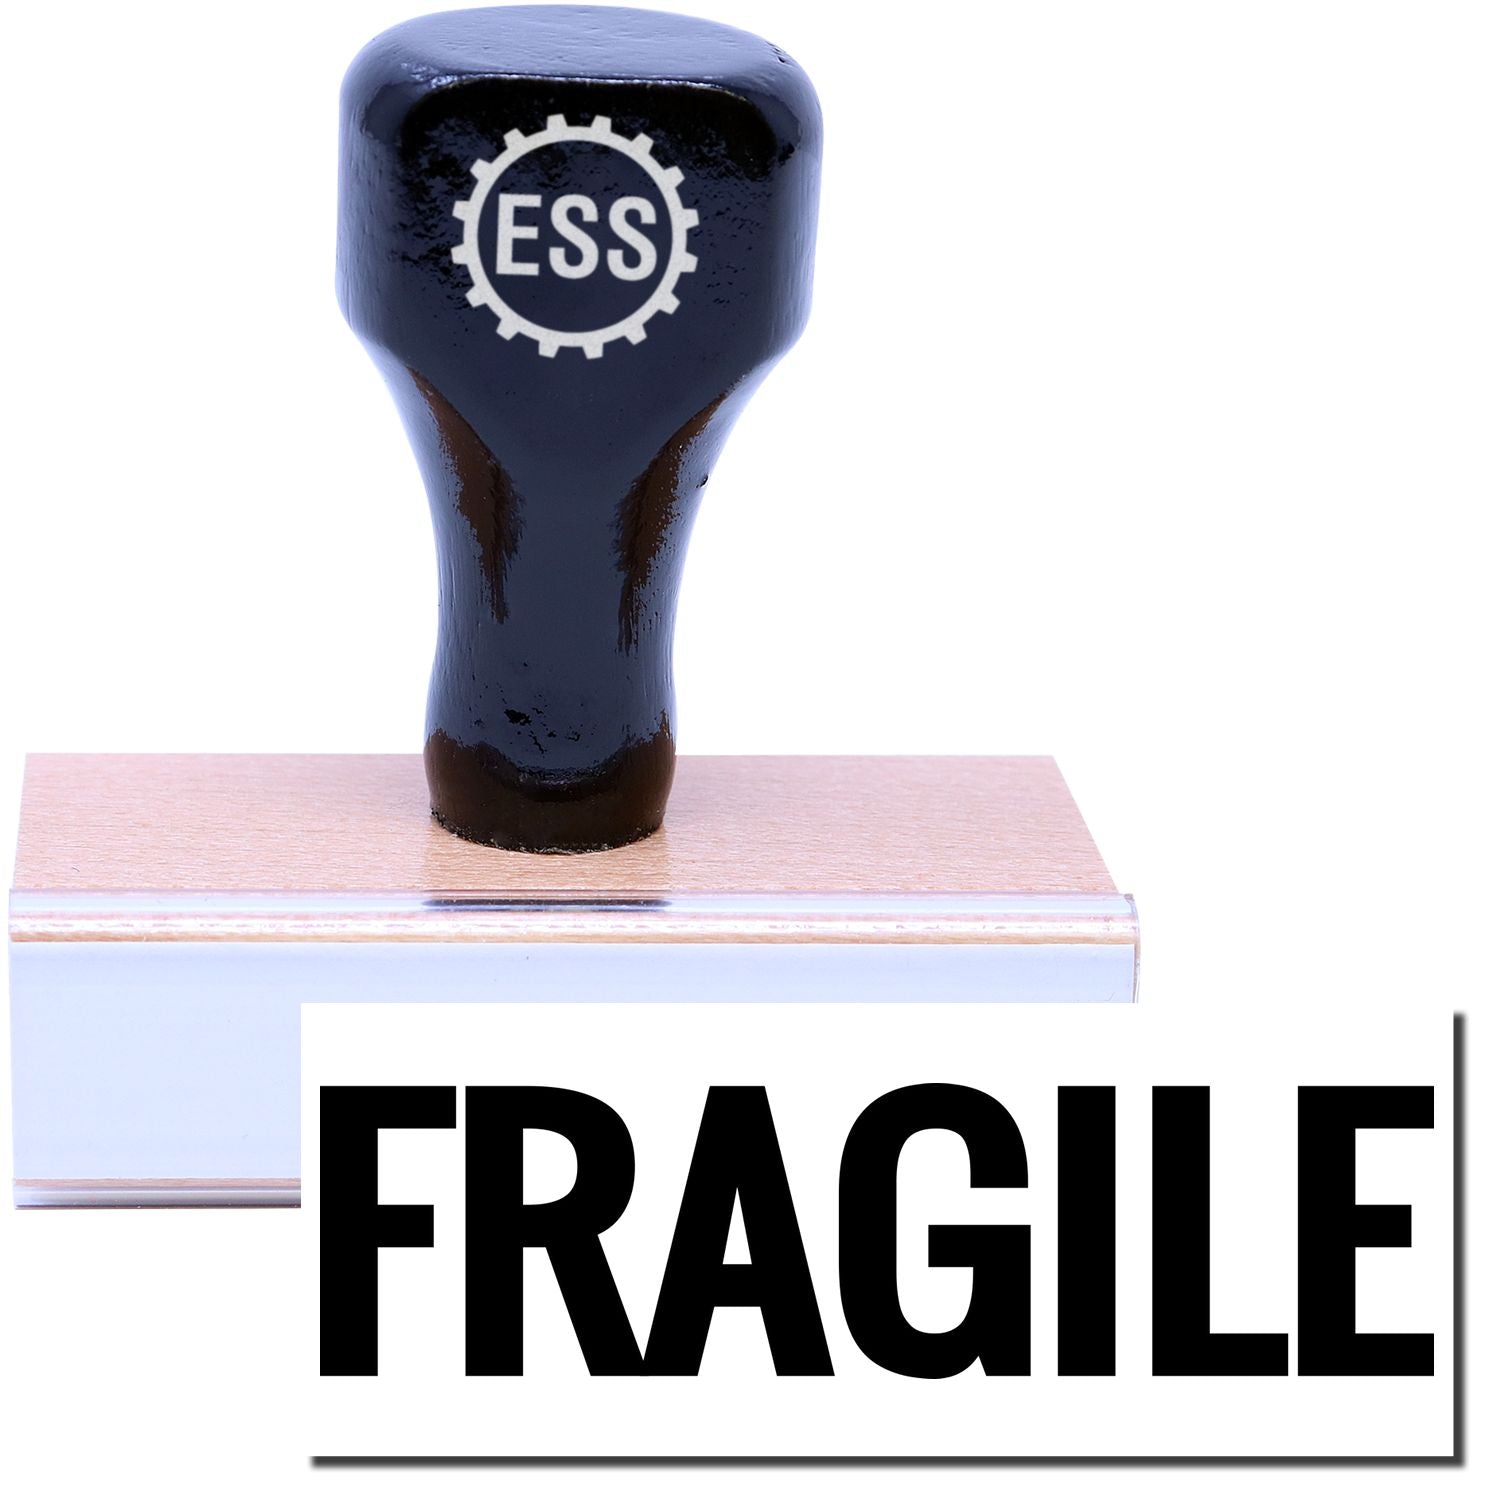 A stock office rubber stamp with a stamped image showing how the text "FRAGILE" in bold font is displayed after stamping.